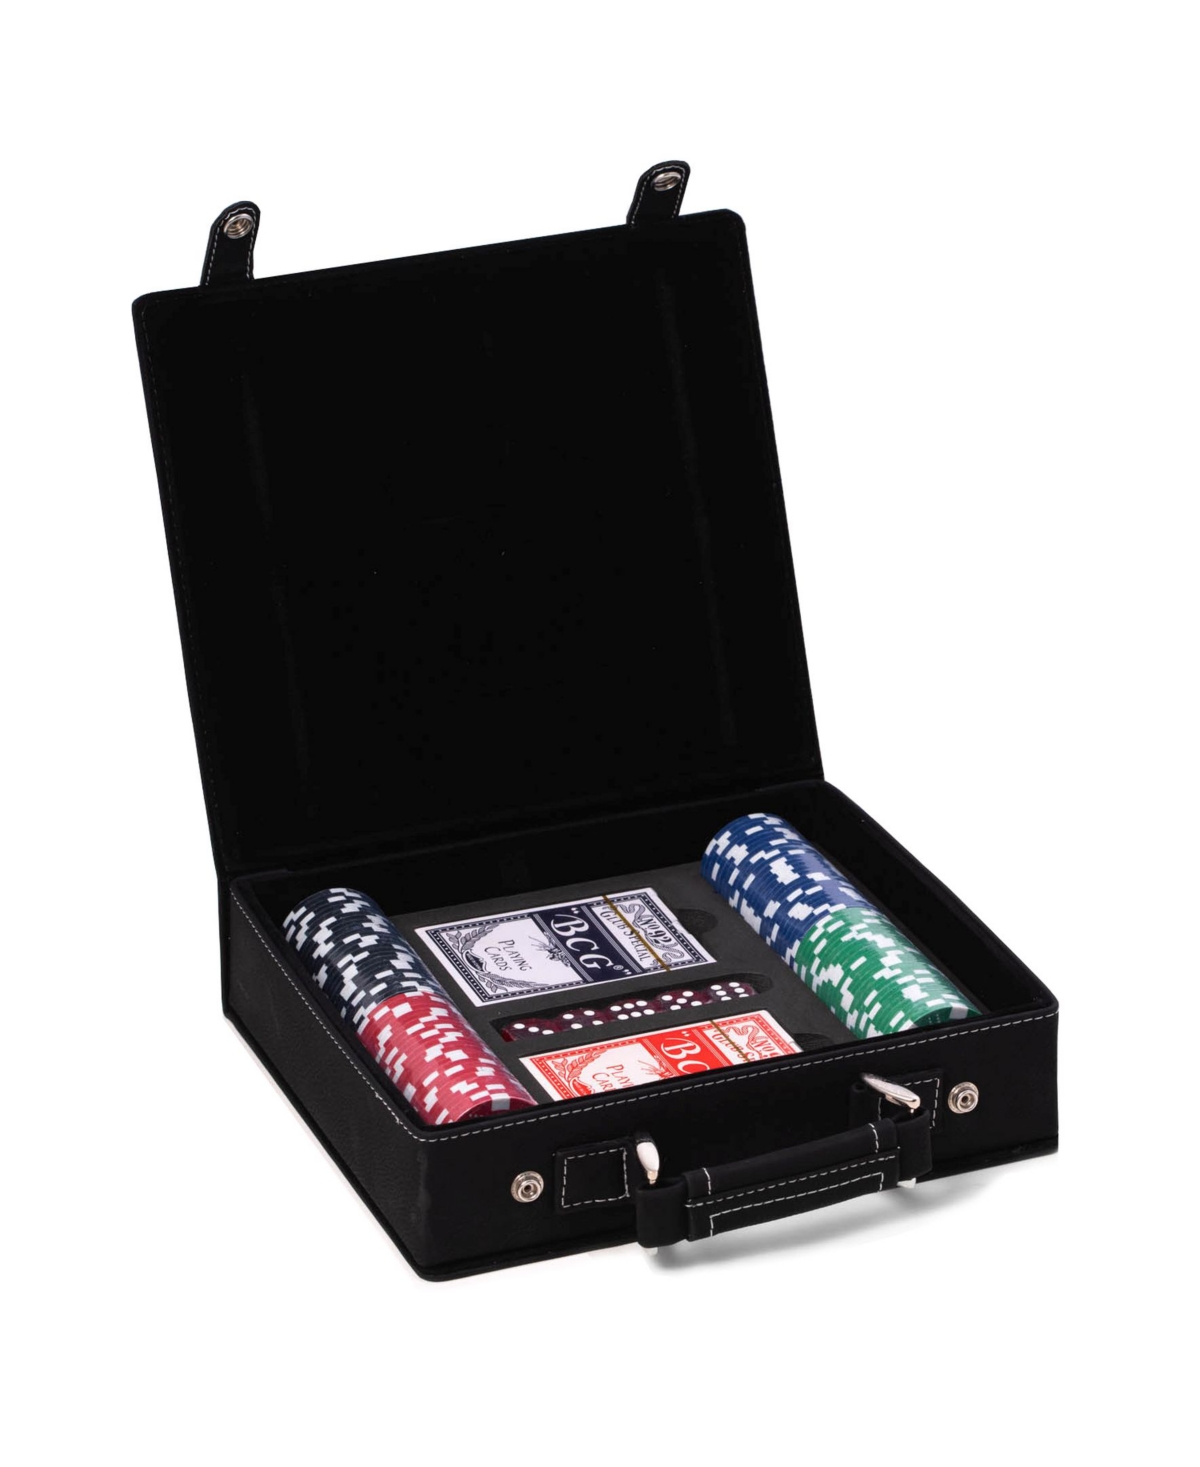 Bey-berk Poker Set Case With 100 Clay Poker Chips, Two Decks Of Playing Cards, 5 Dice In Multi